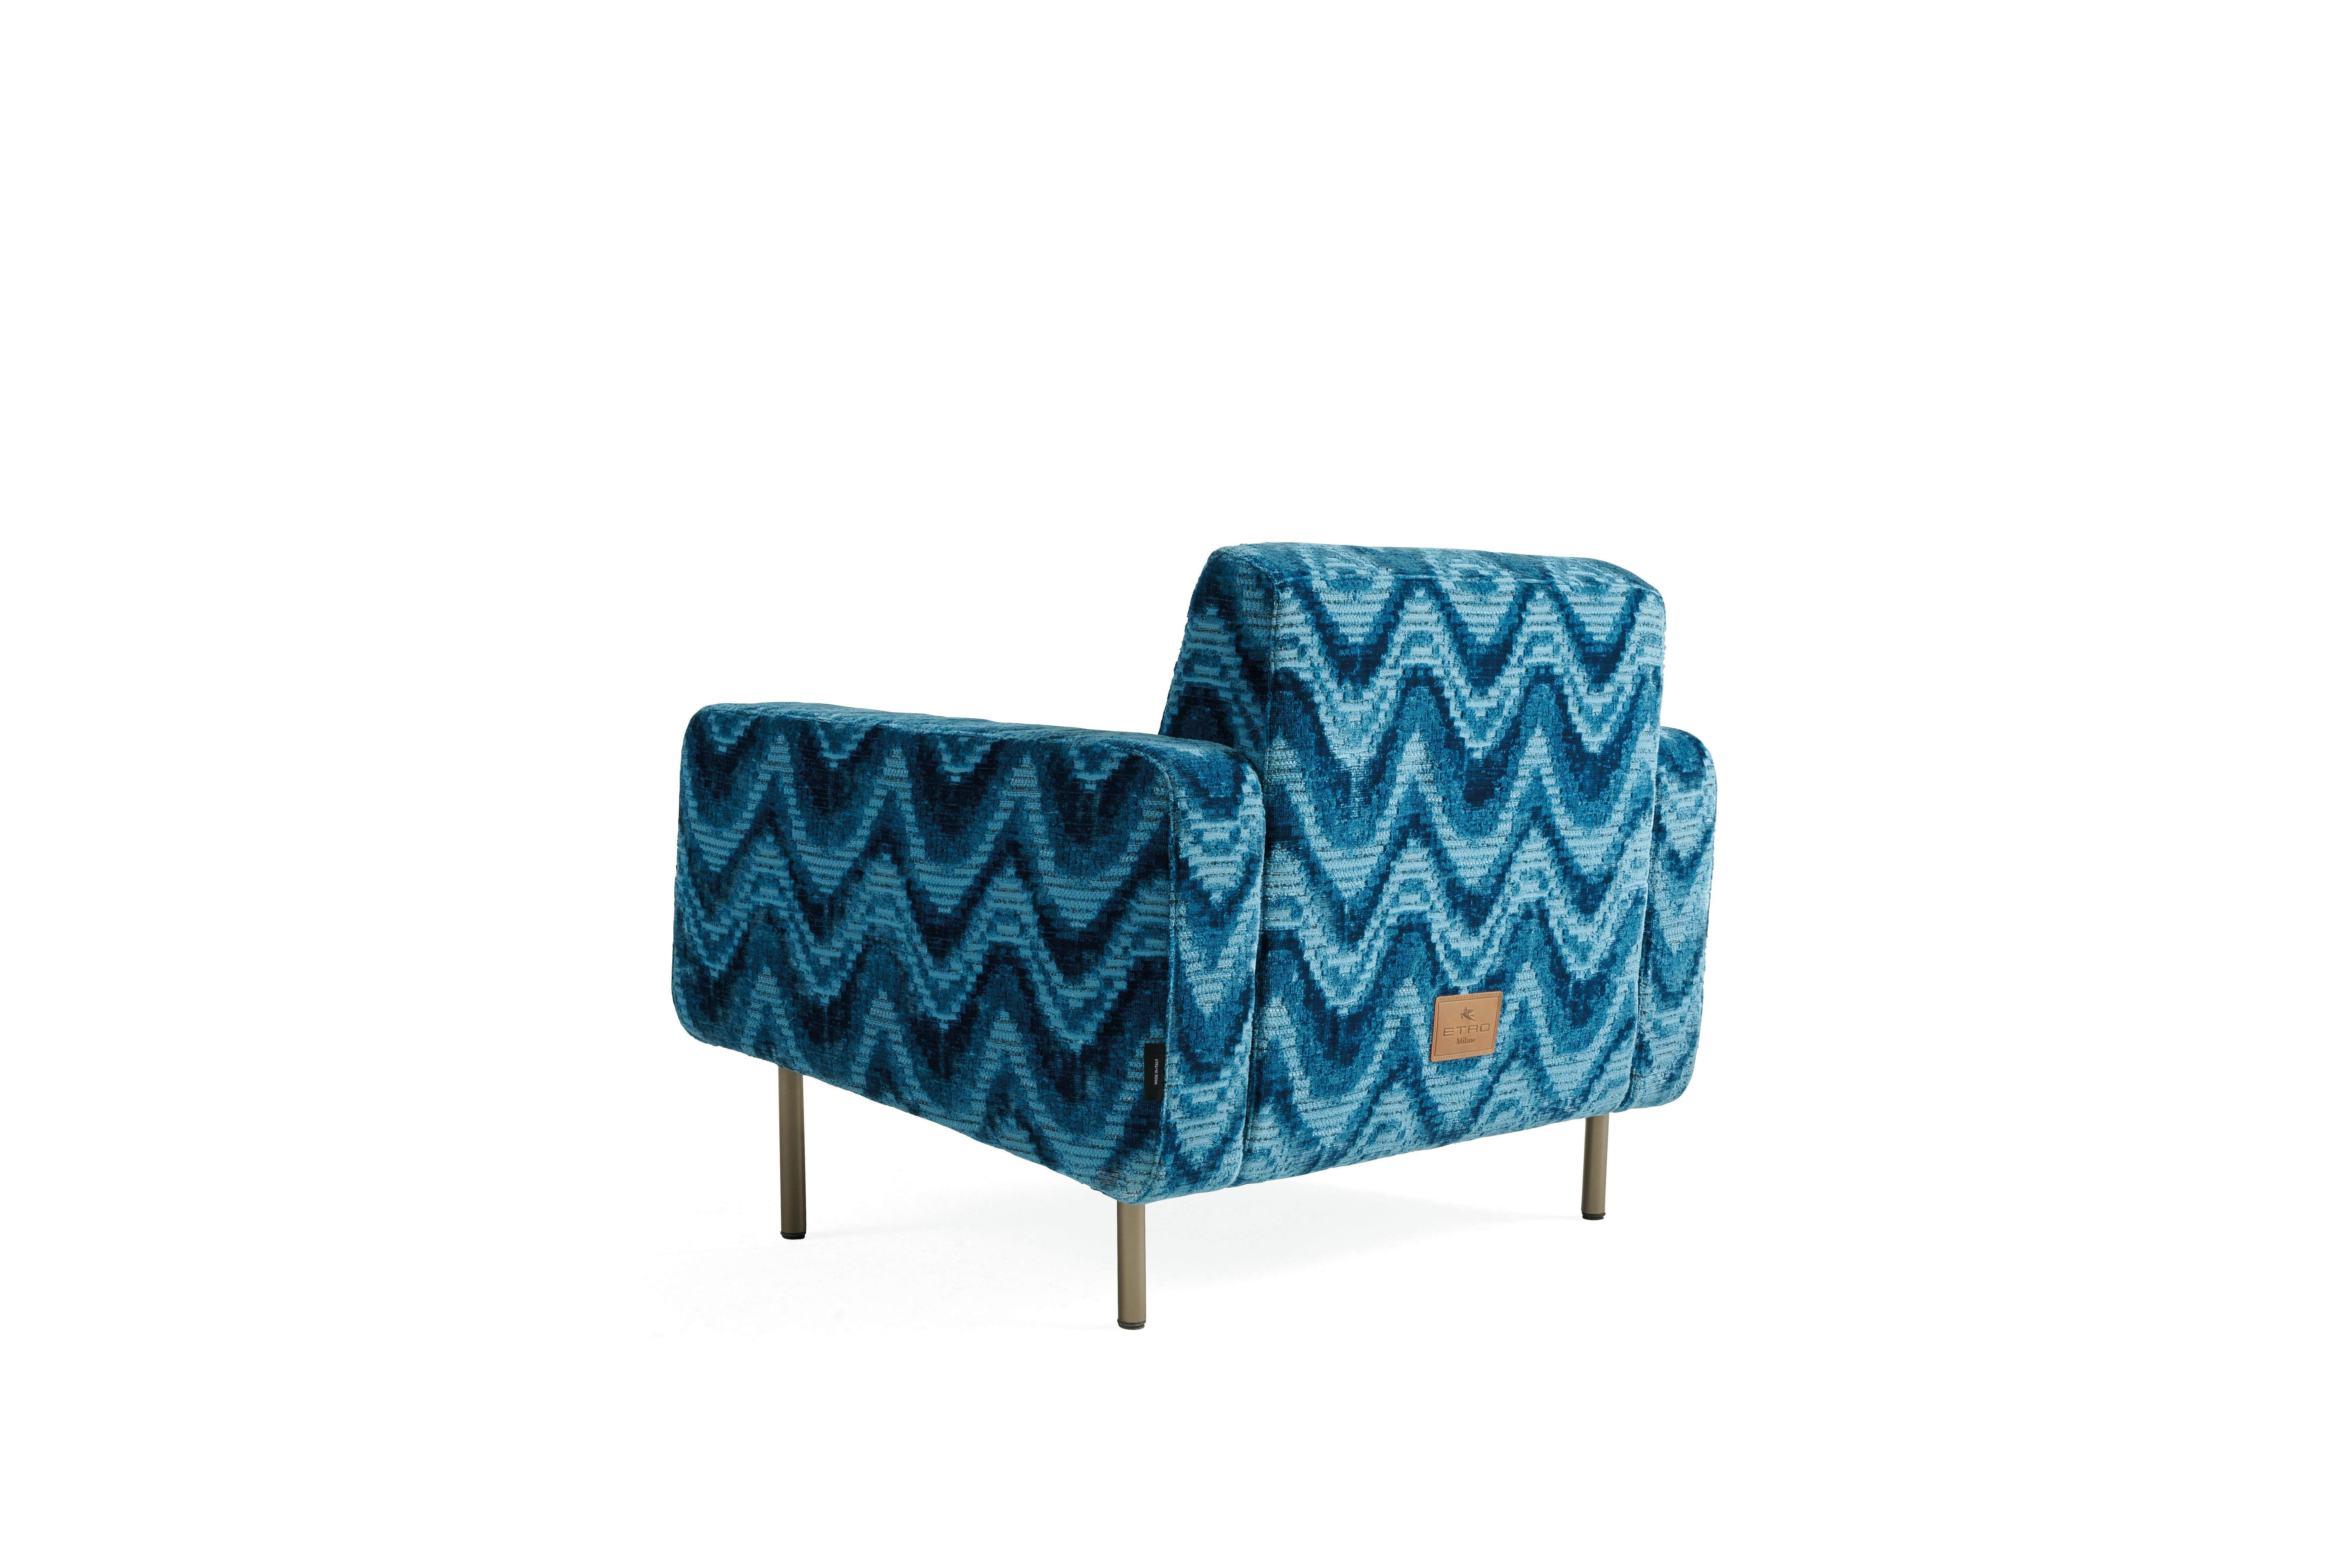 Italian 21st Century Type Armchair in Blue Jacquard Fabric by Etro Home Interiors For Sale